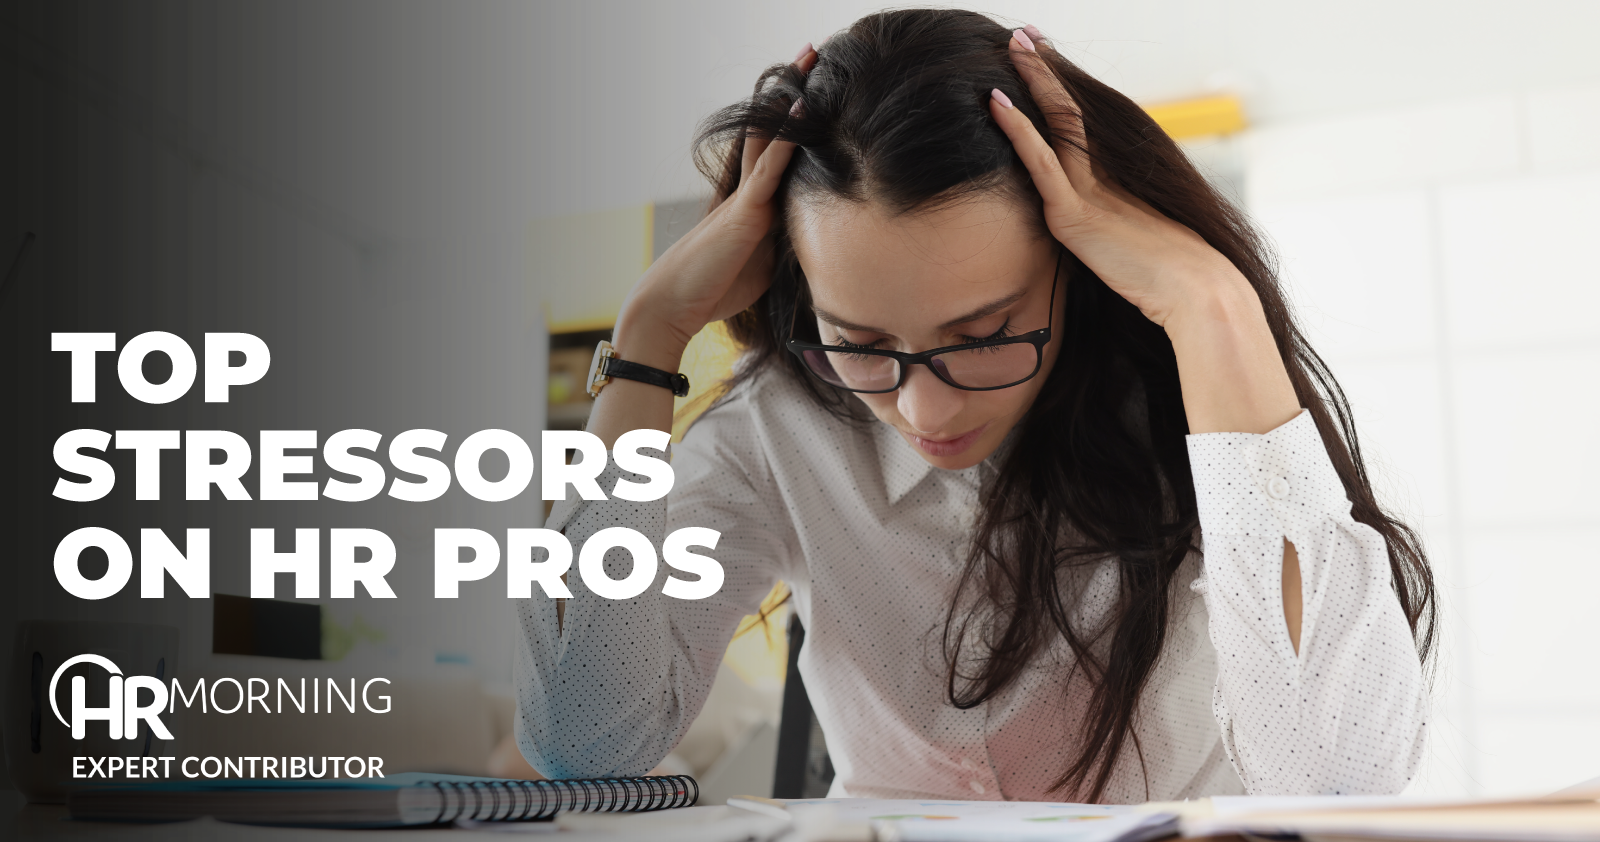 Top Stressors On HR Pros